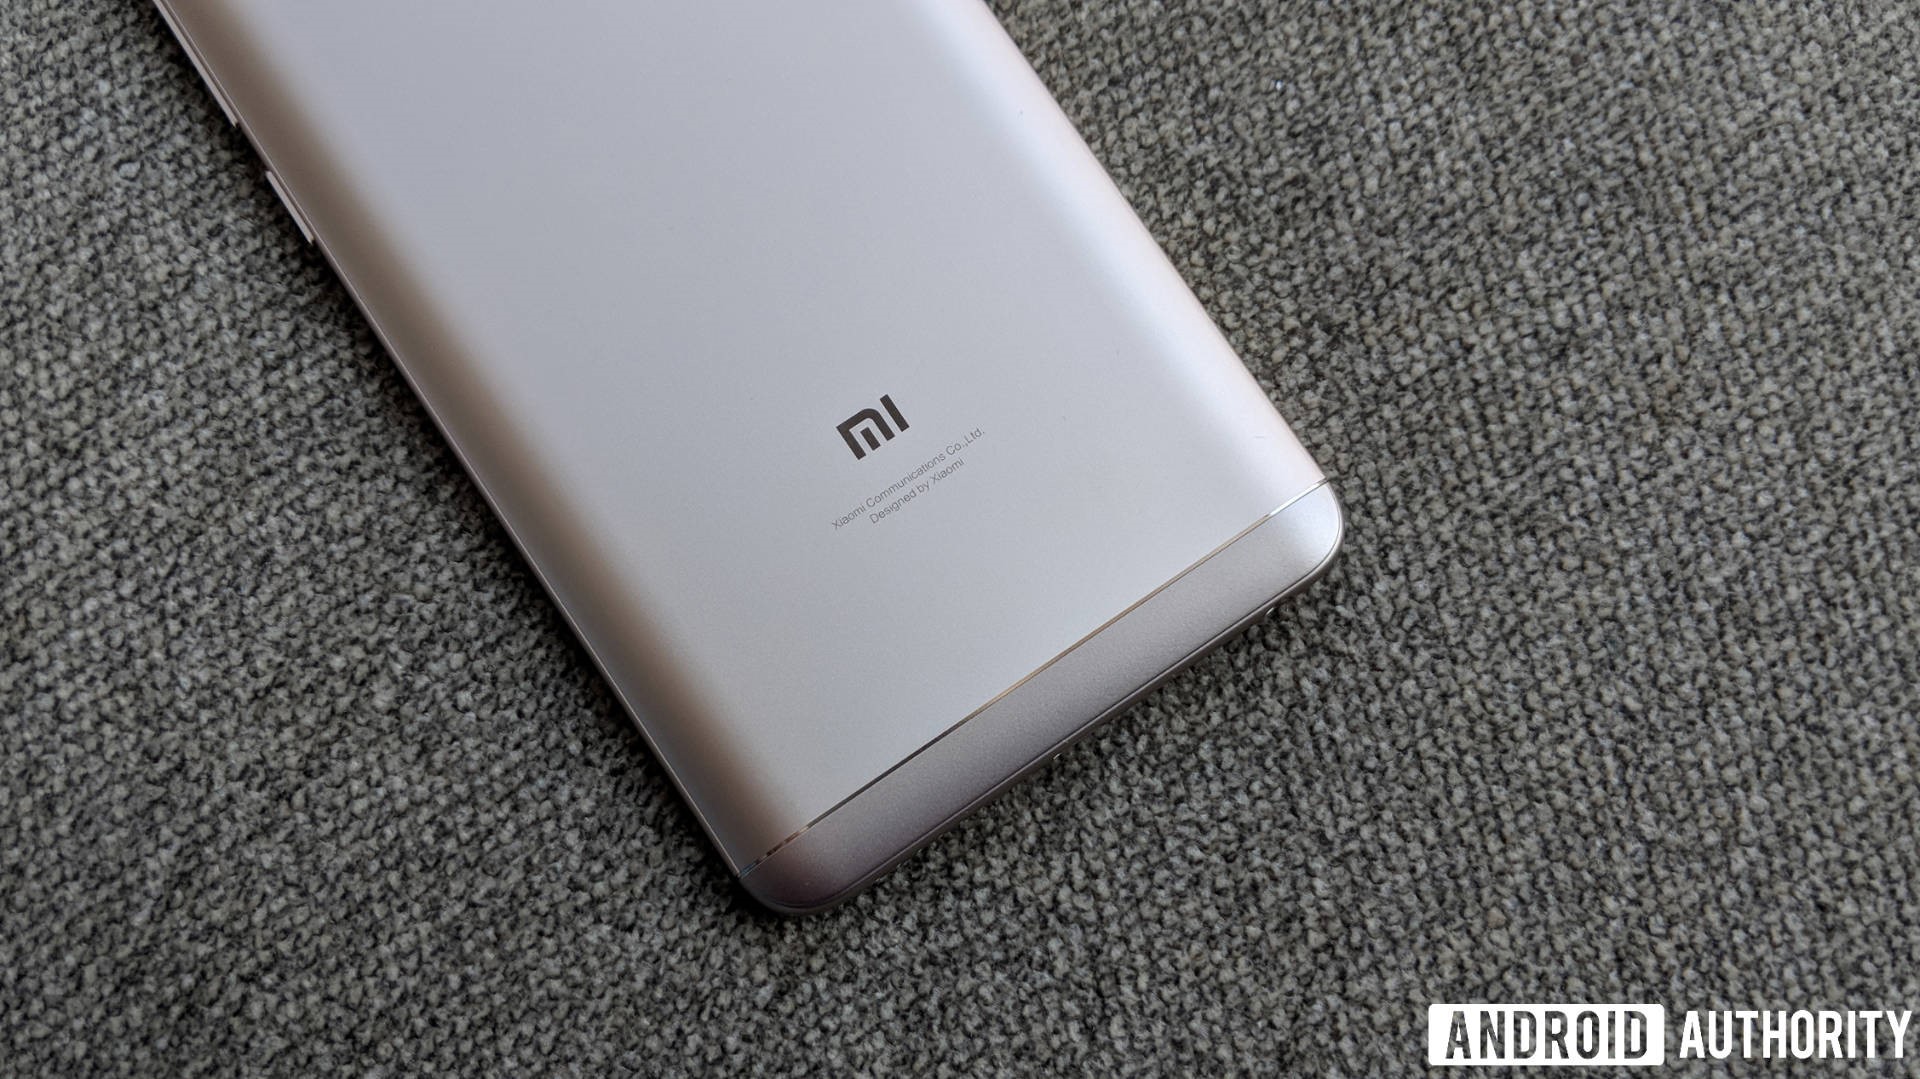 The Xiaomi logo on the back of the Redmi Note 5 Pro.